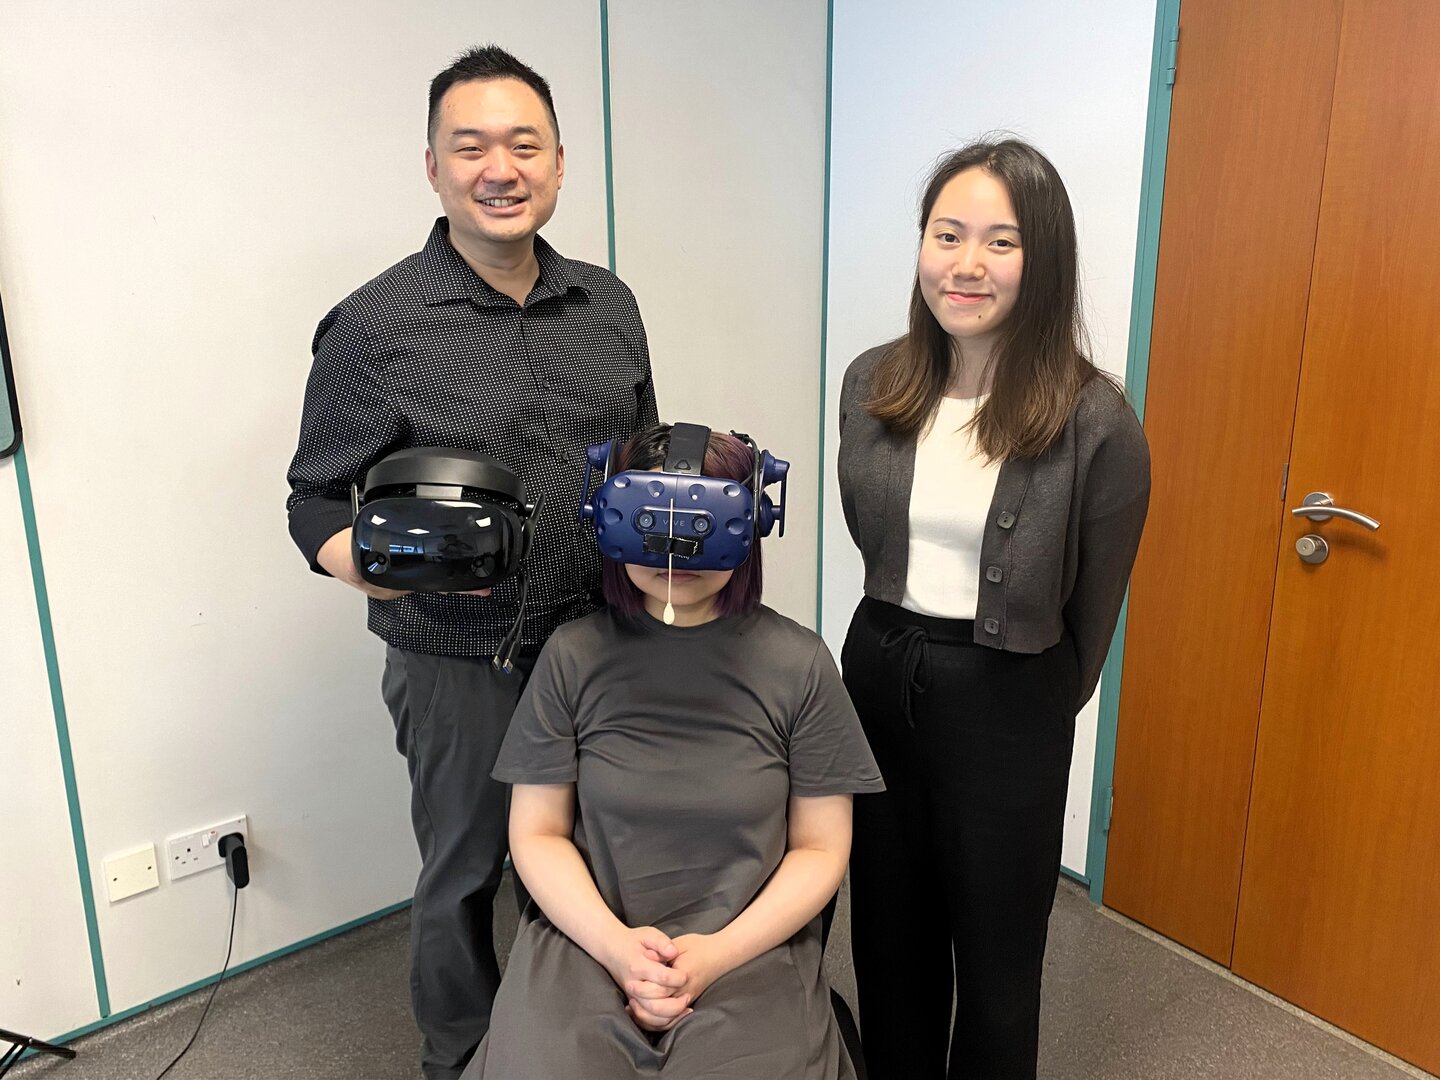 NTU’s Wee Kim Wee School of Communication Assistant Professor Benjamin Li Junting, who led the study, and co-author of the study, NTU’s WKWSCI master’s student Ms Lee Hui Min, posing with a subject equipped with a VR headset 